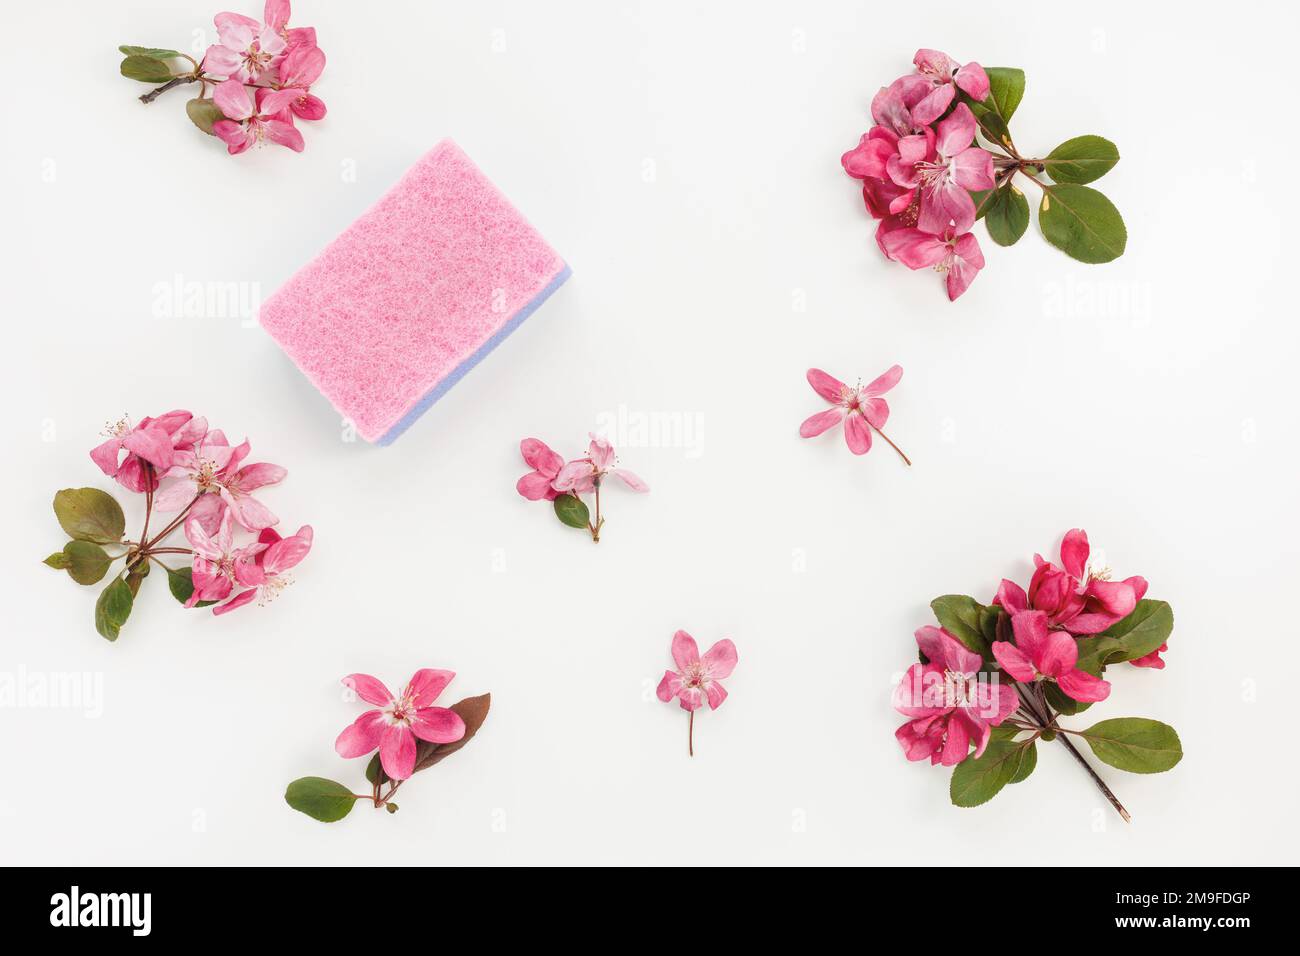 https://c8.alamy.com/comp/2M9FDGP/pink-and-purple-sponge-for-cleaning-and-dishwashing-on-white-background-with-flowers-accessories-for-household-chores-concept-spring-cleaning-kitchen-clean-and-fresh-home-concept-2M9FDGP.jpg